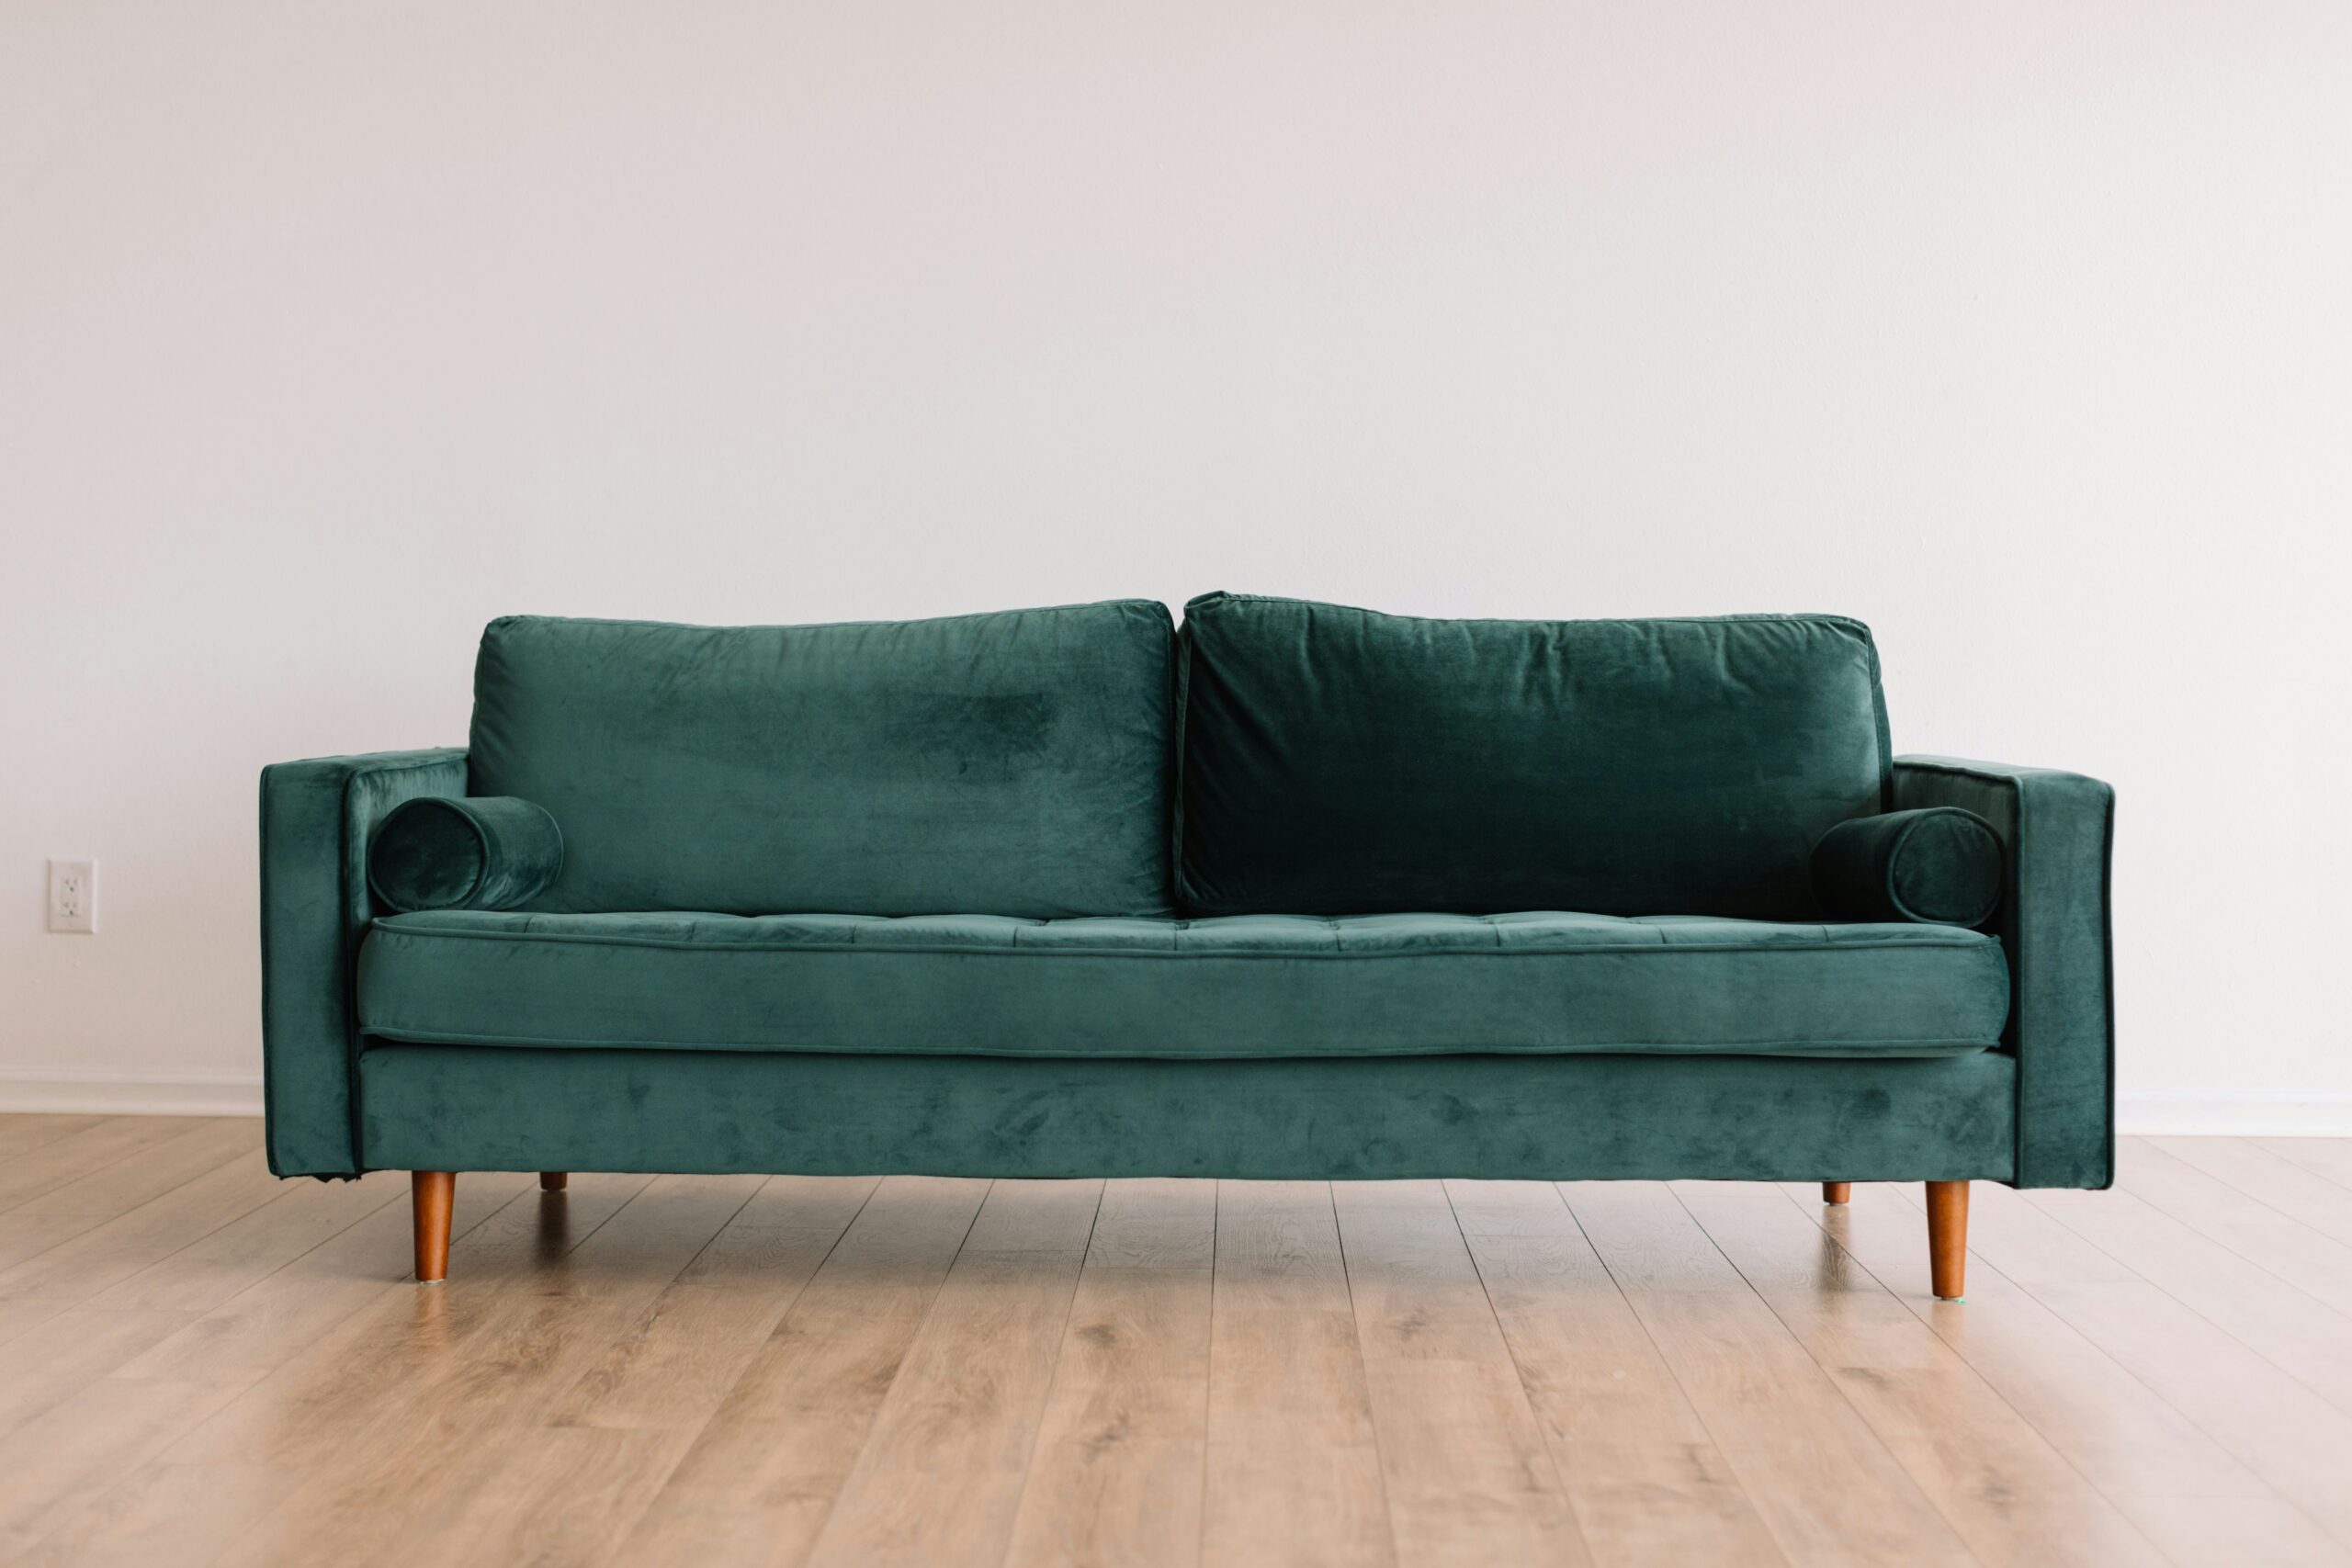 Choosing the Right Furniture for a Comfortable Home